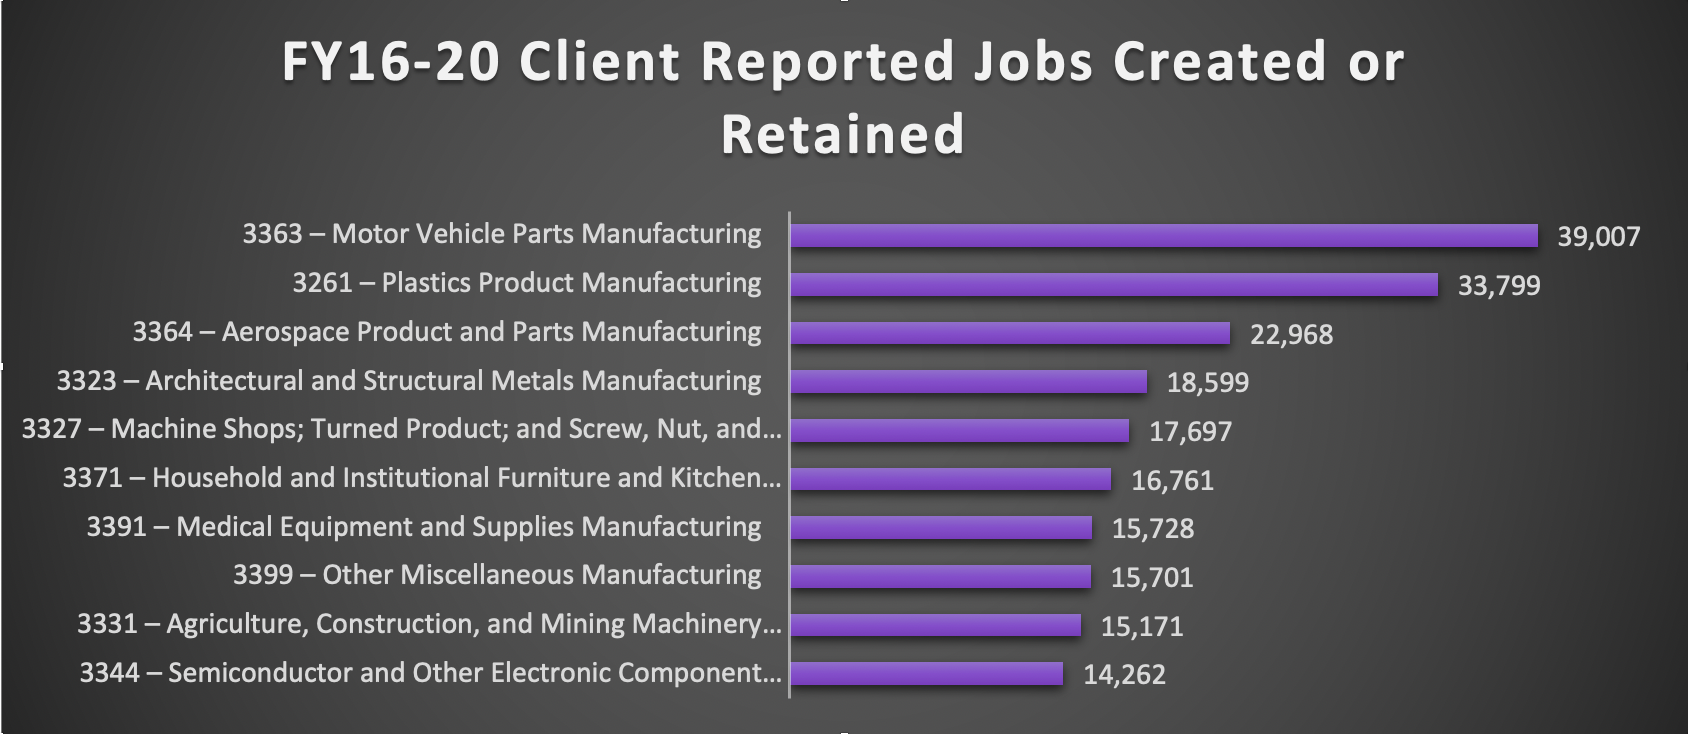 FY16-20 Client Reported Jobs Created or Retained